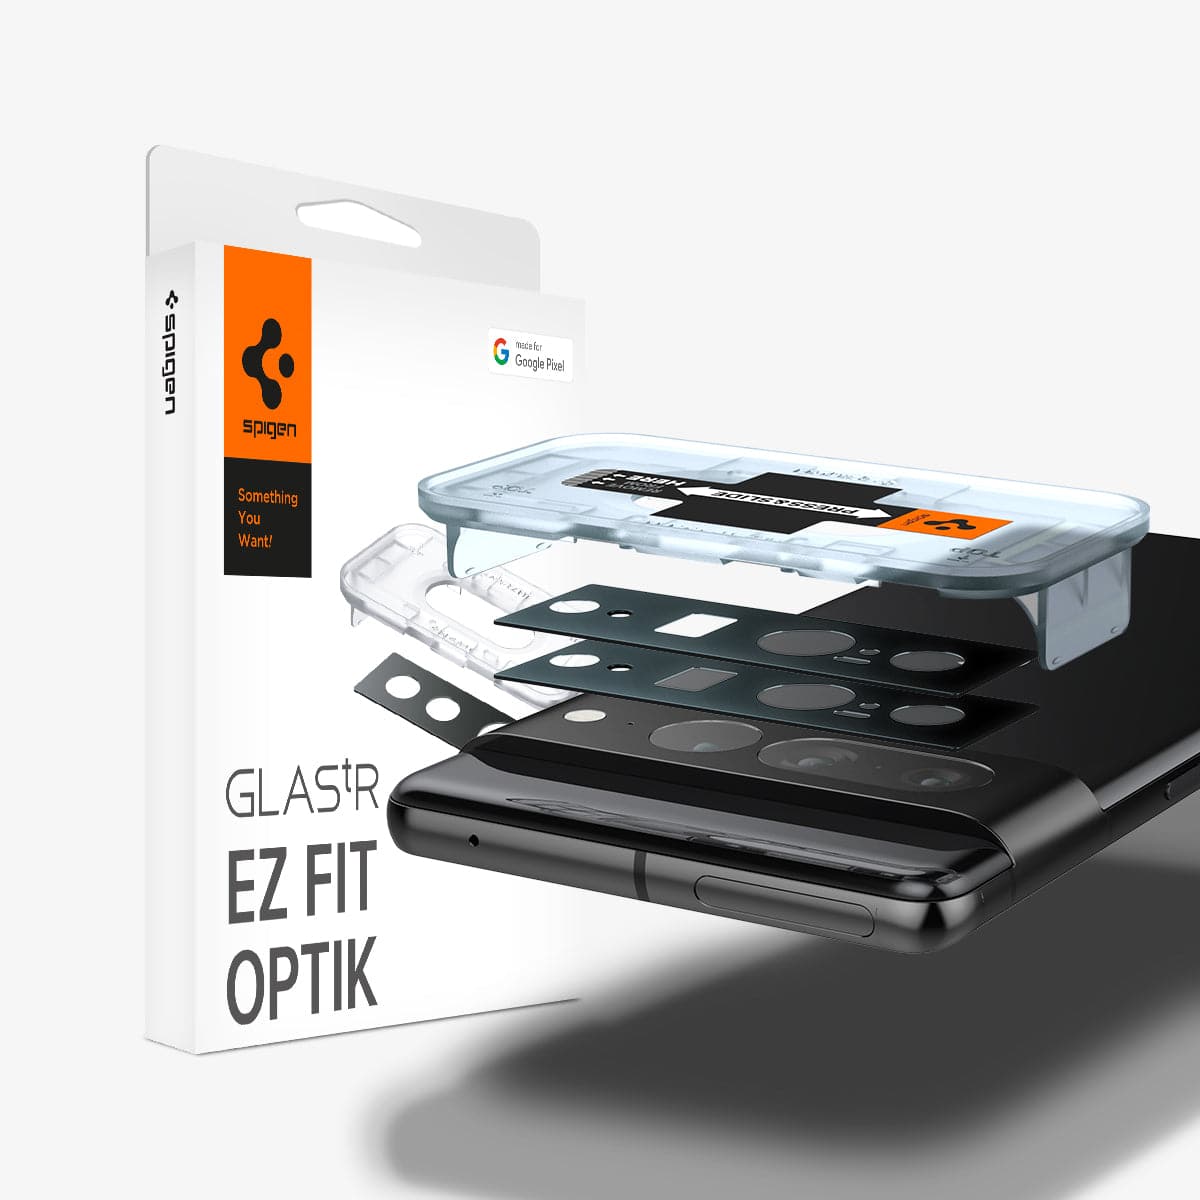 AGL05470 - Pixel 7 Pro Optik Lens Protector in black showing the device, two optik lens protectors, ez fit tray and packaging